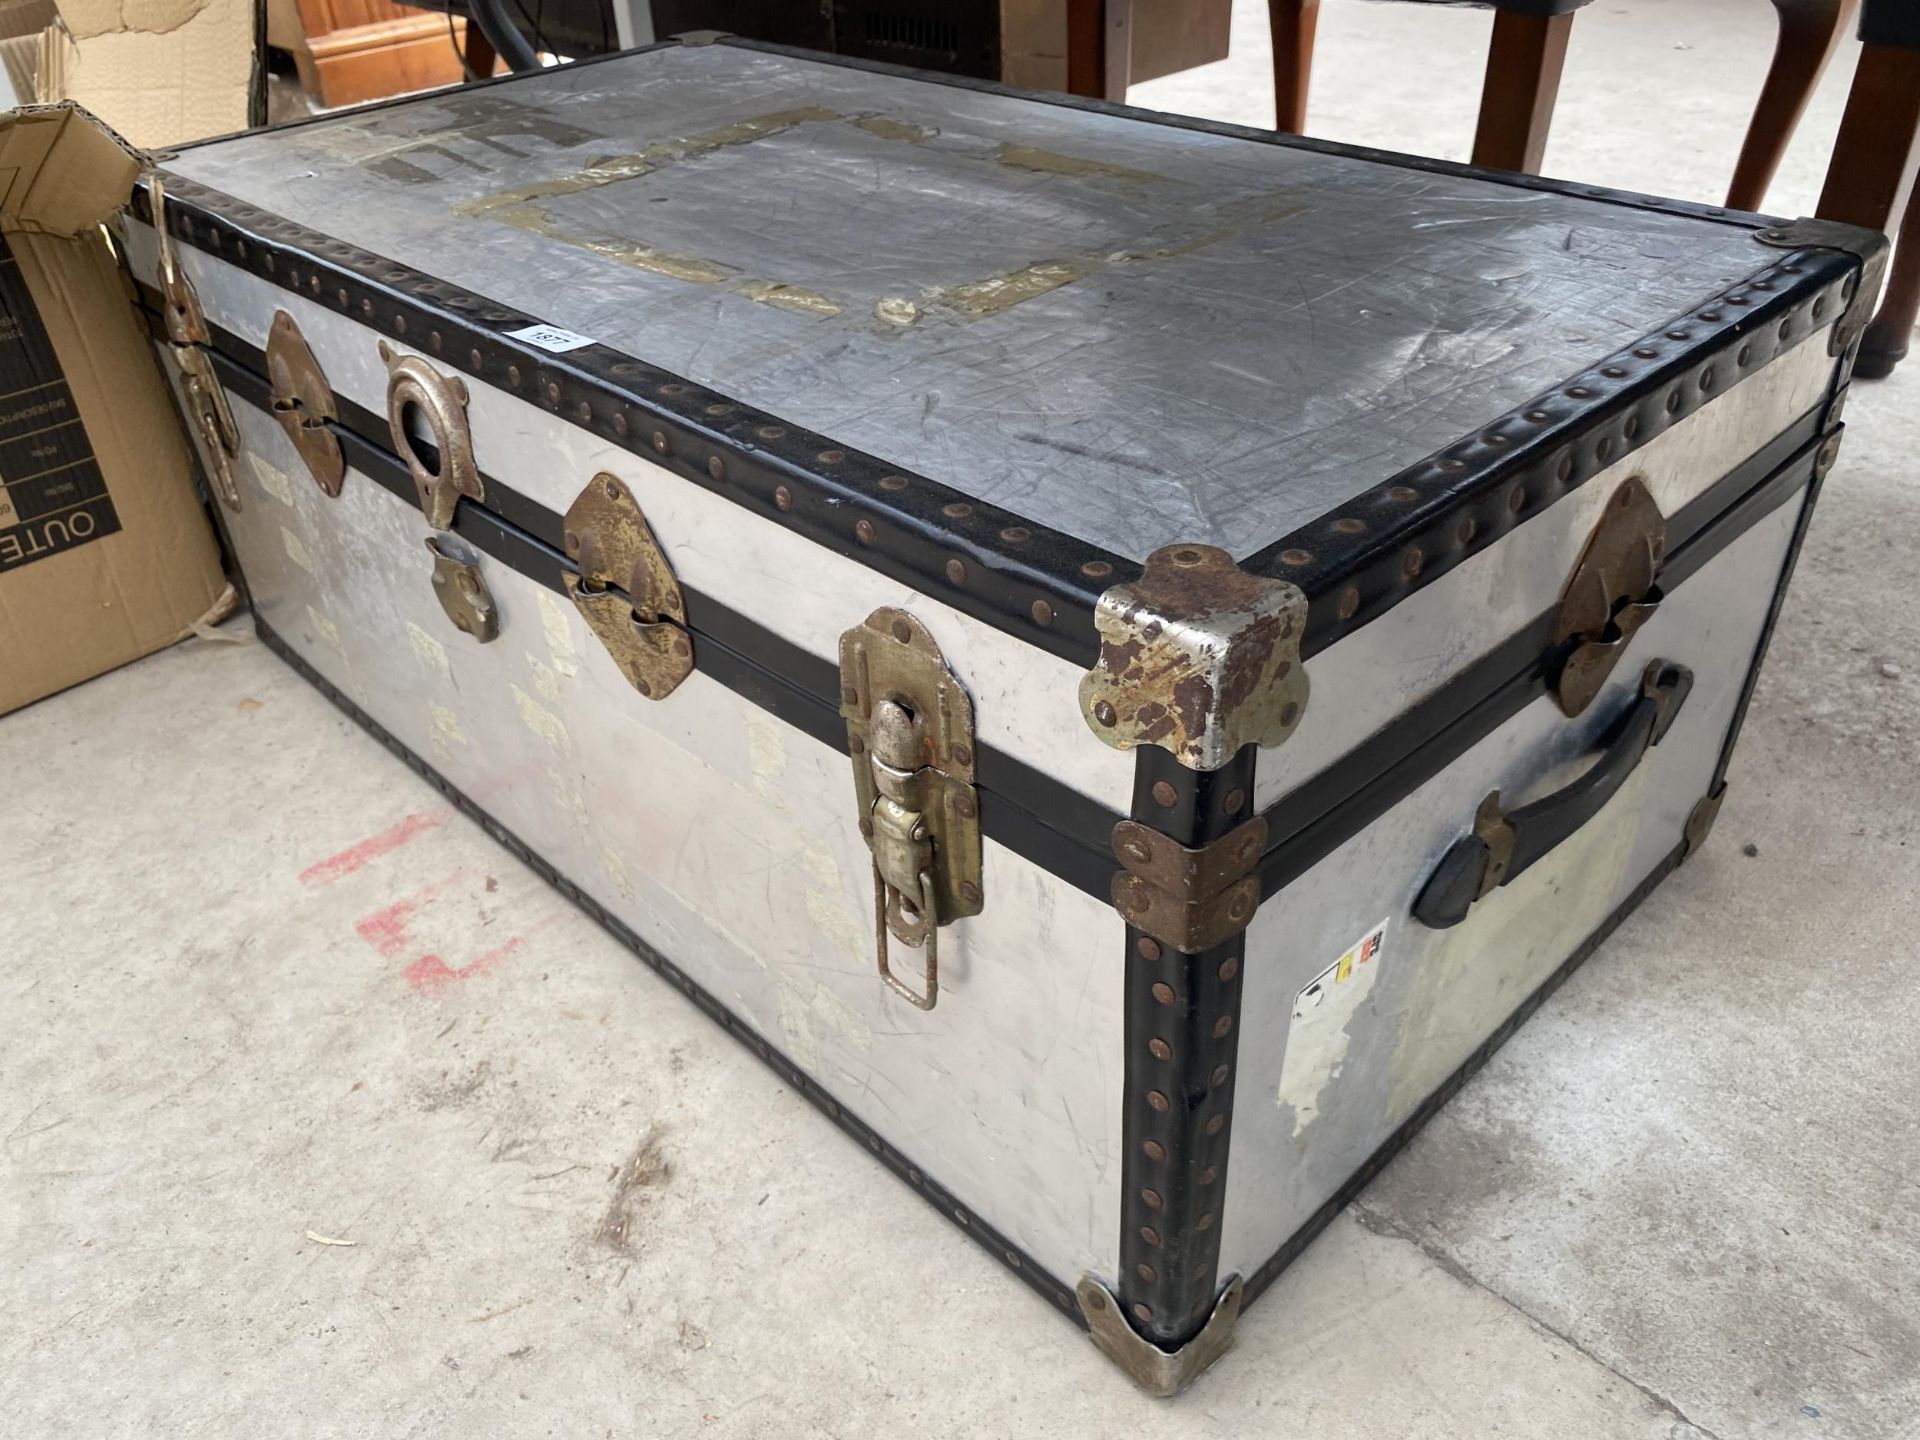 A LARGE HARD CASED TRAVEL TRUNK - Image 2 of 3